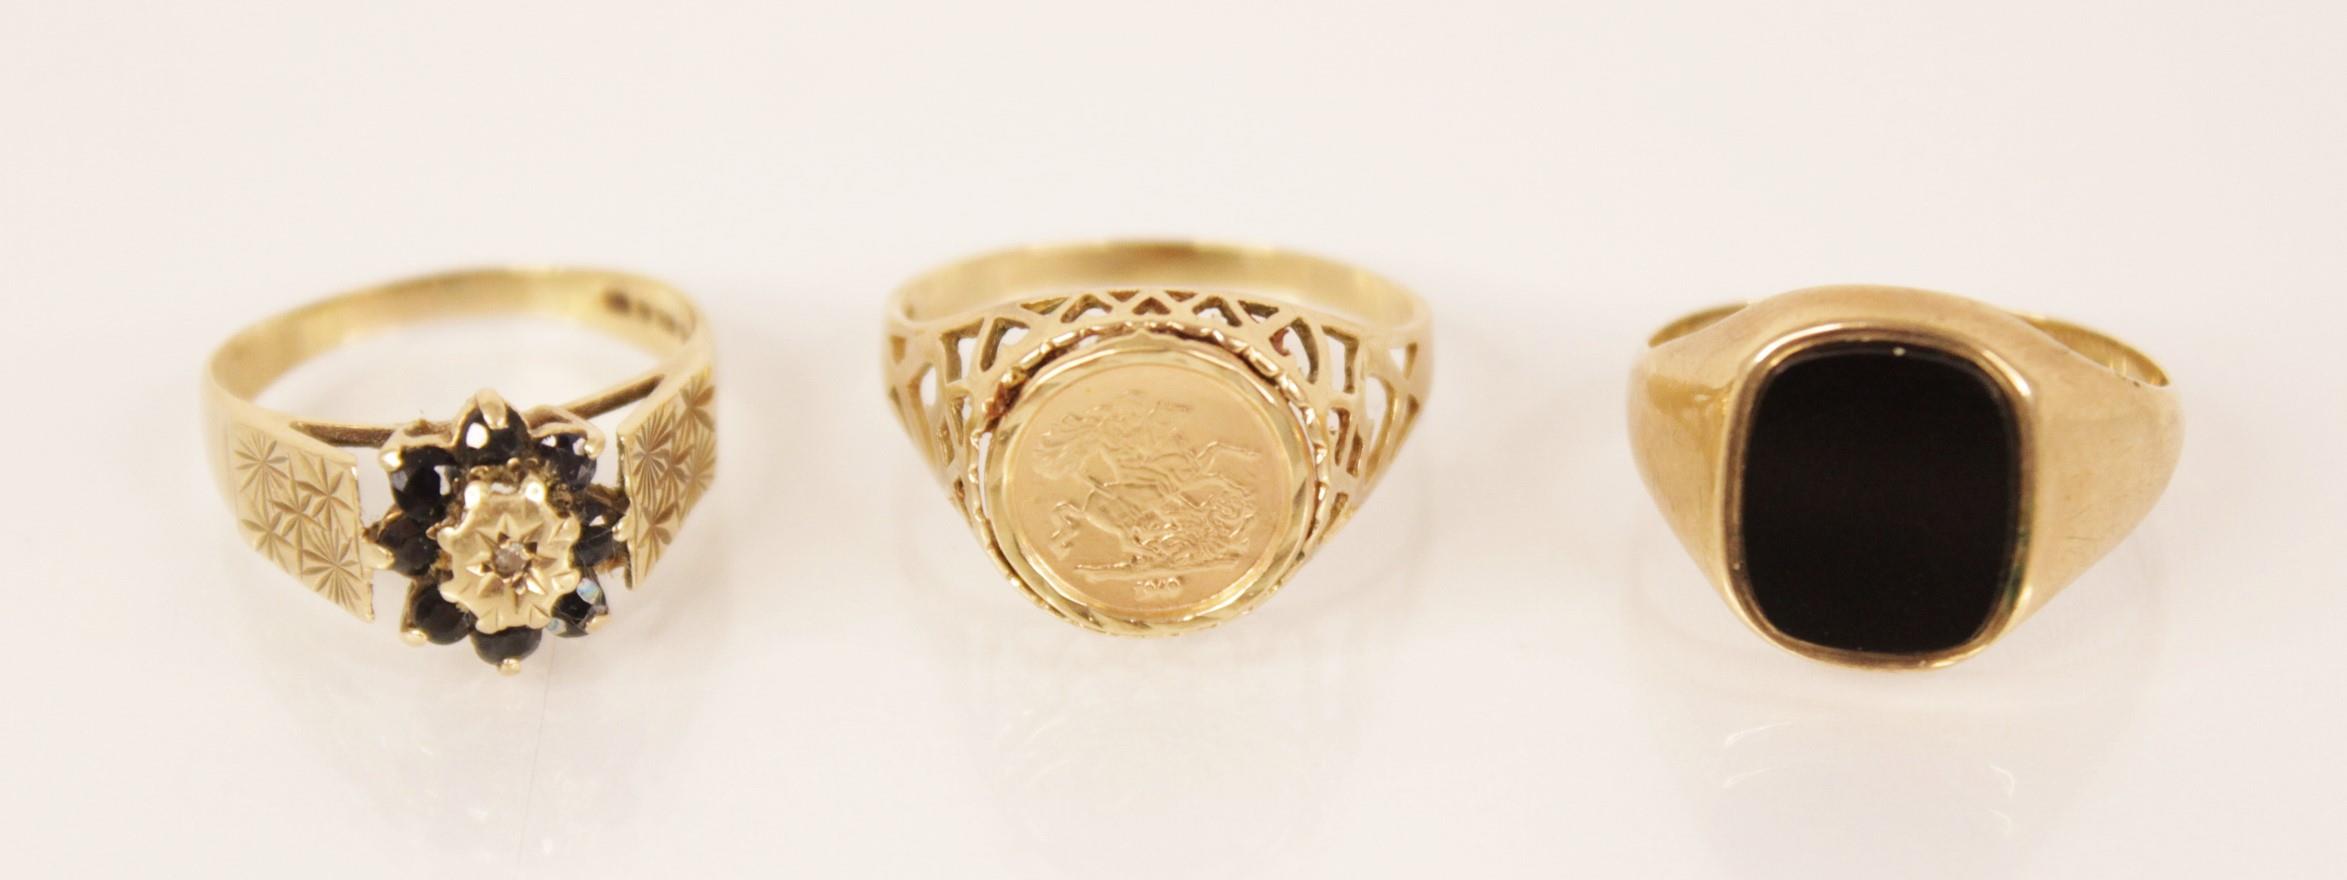 A 9ct gold signet ring, the central black panel measuring 12mm x 10mm, set to a plain polished 9ct - Bild 2 aus 2